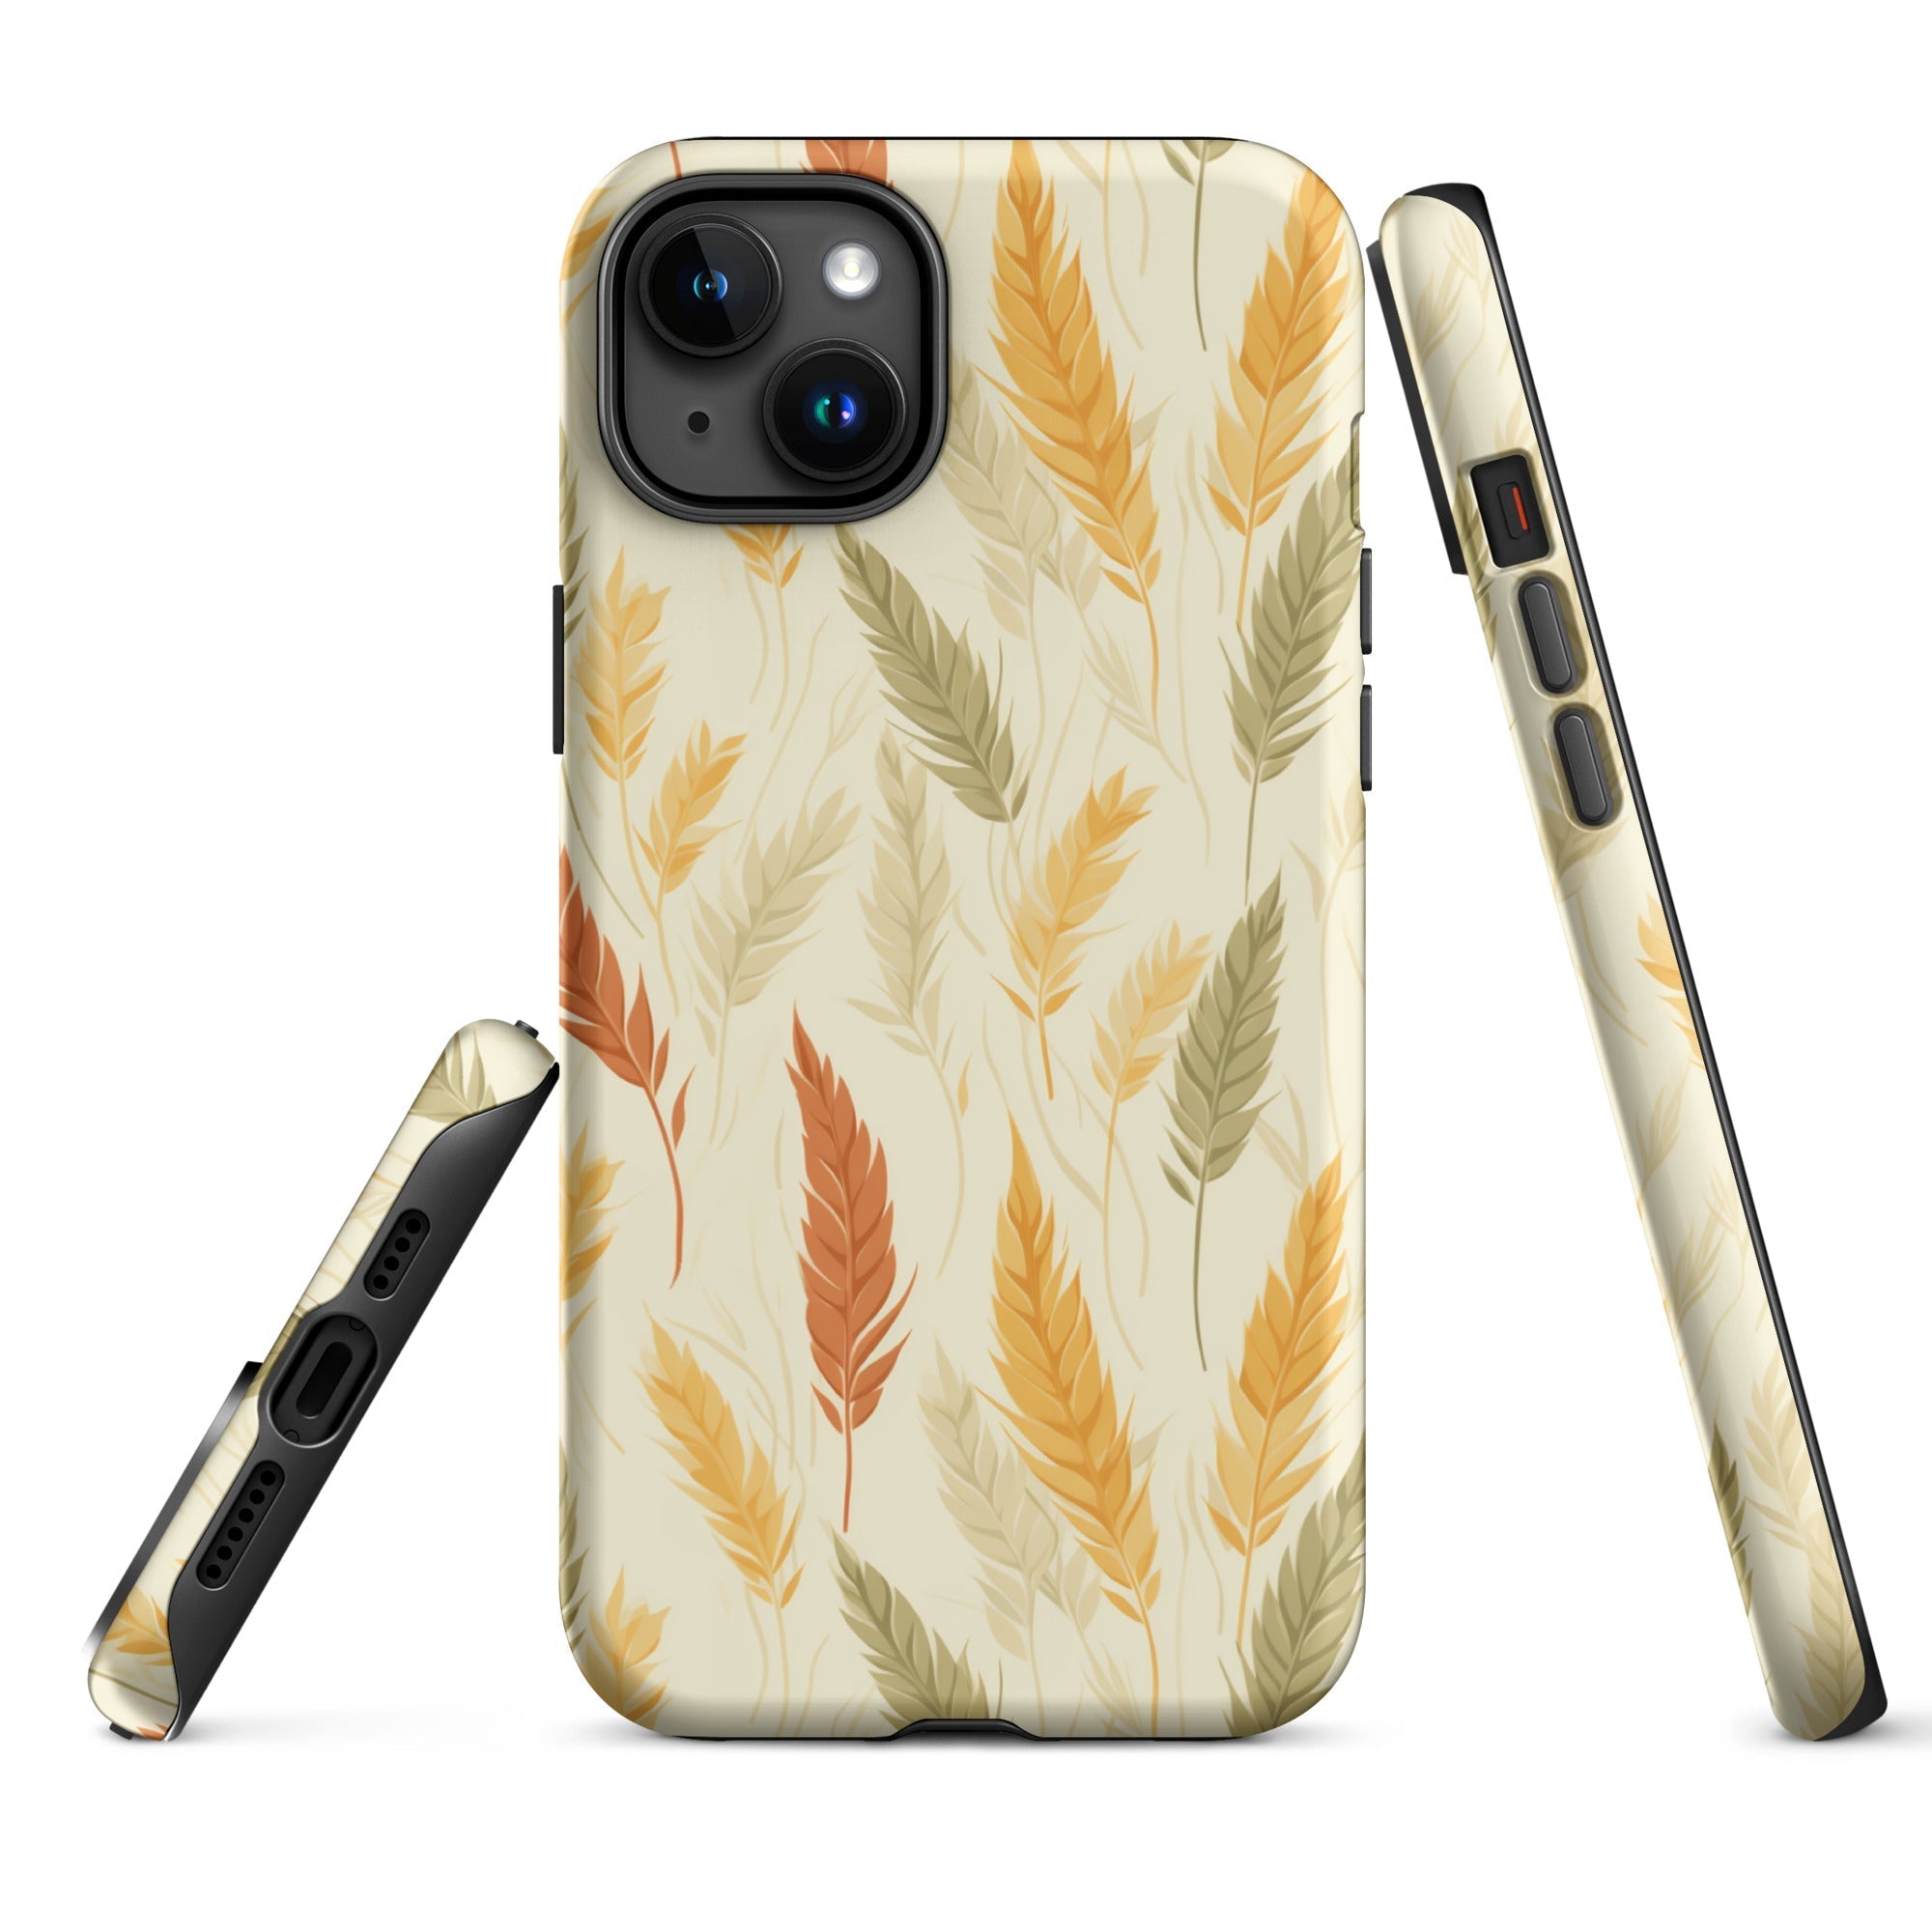 Feather-Woven Wheat Fields - A Naturecore Vision - iPhone Case - Pattern Symphony